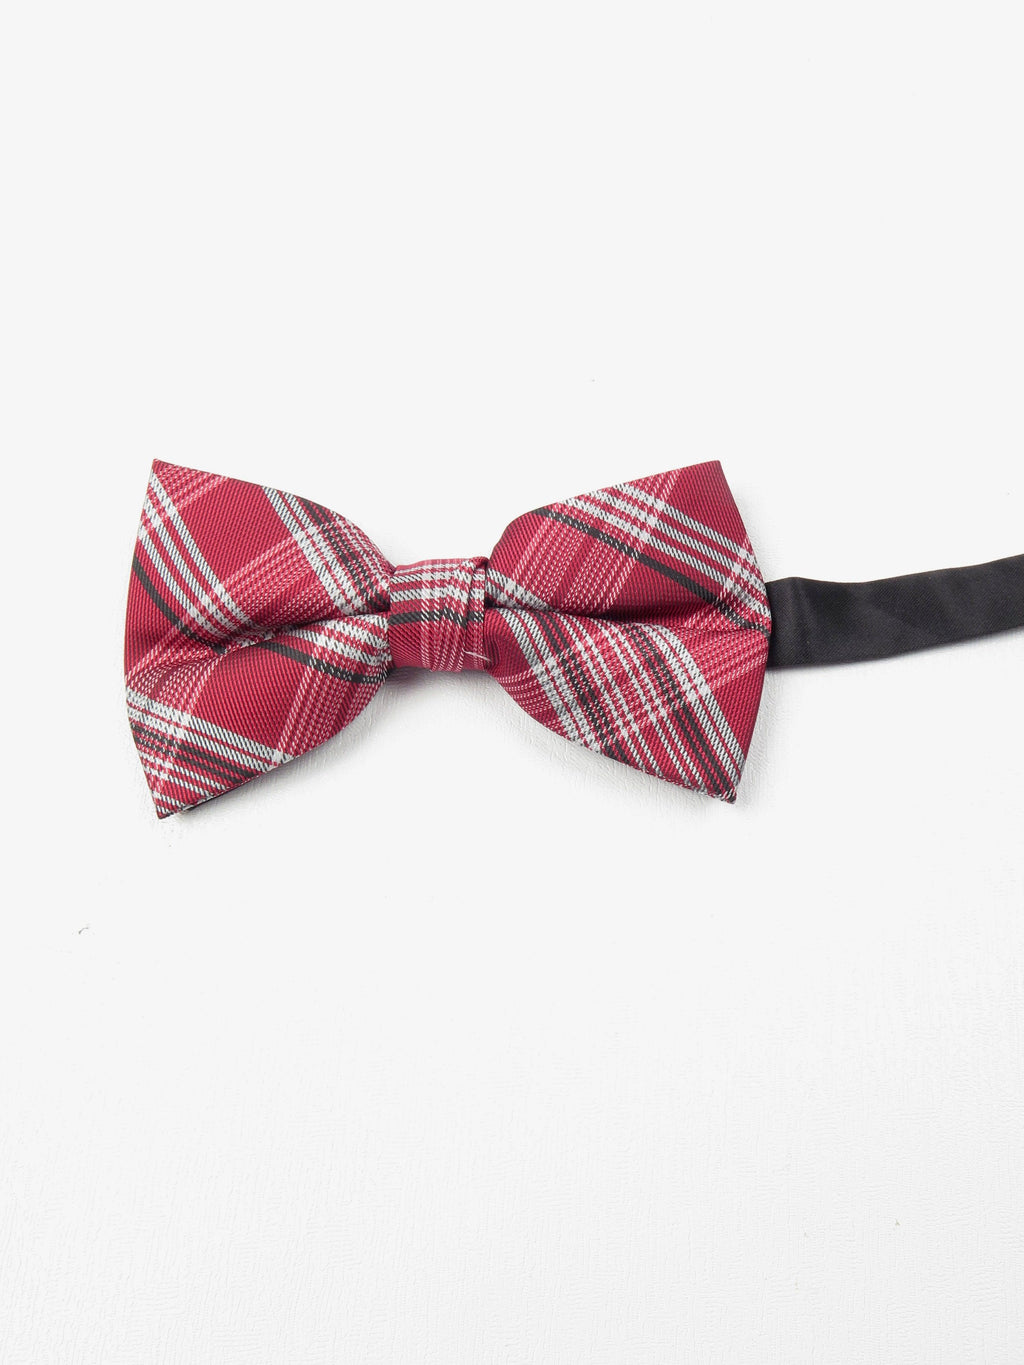 Wine Check Dickie Bow Tie - The Harlequin